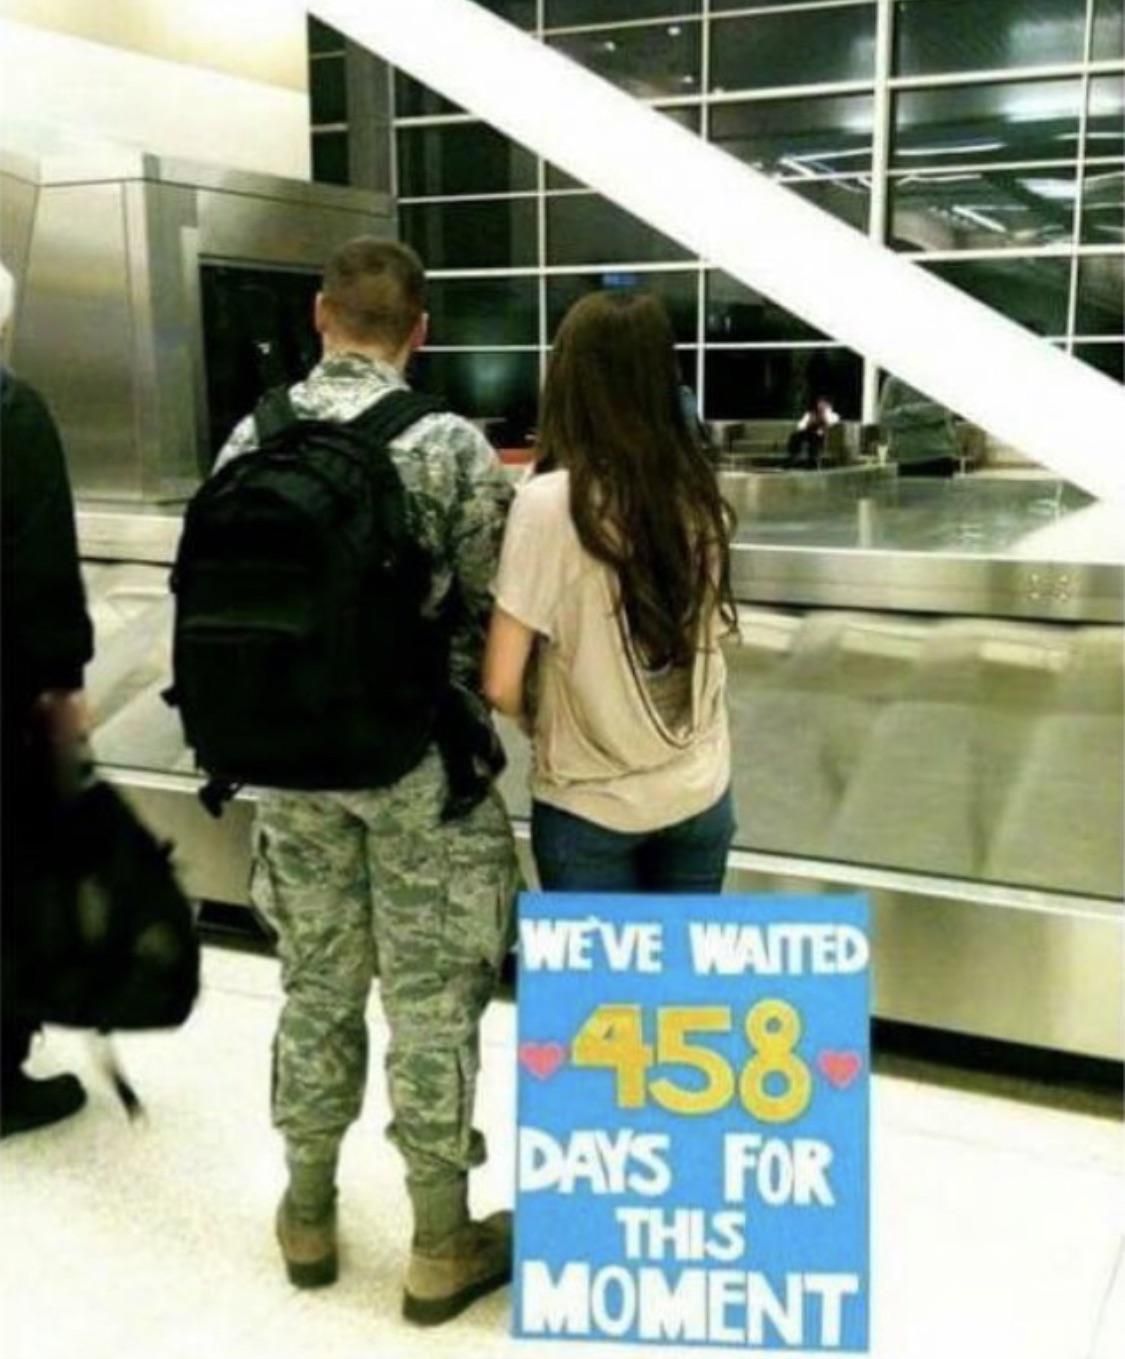 Nobody should have to wait that long for their luggage.